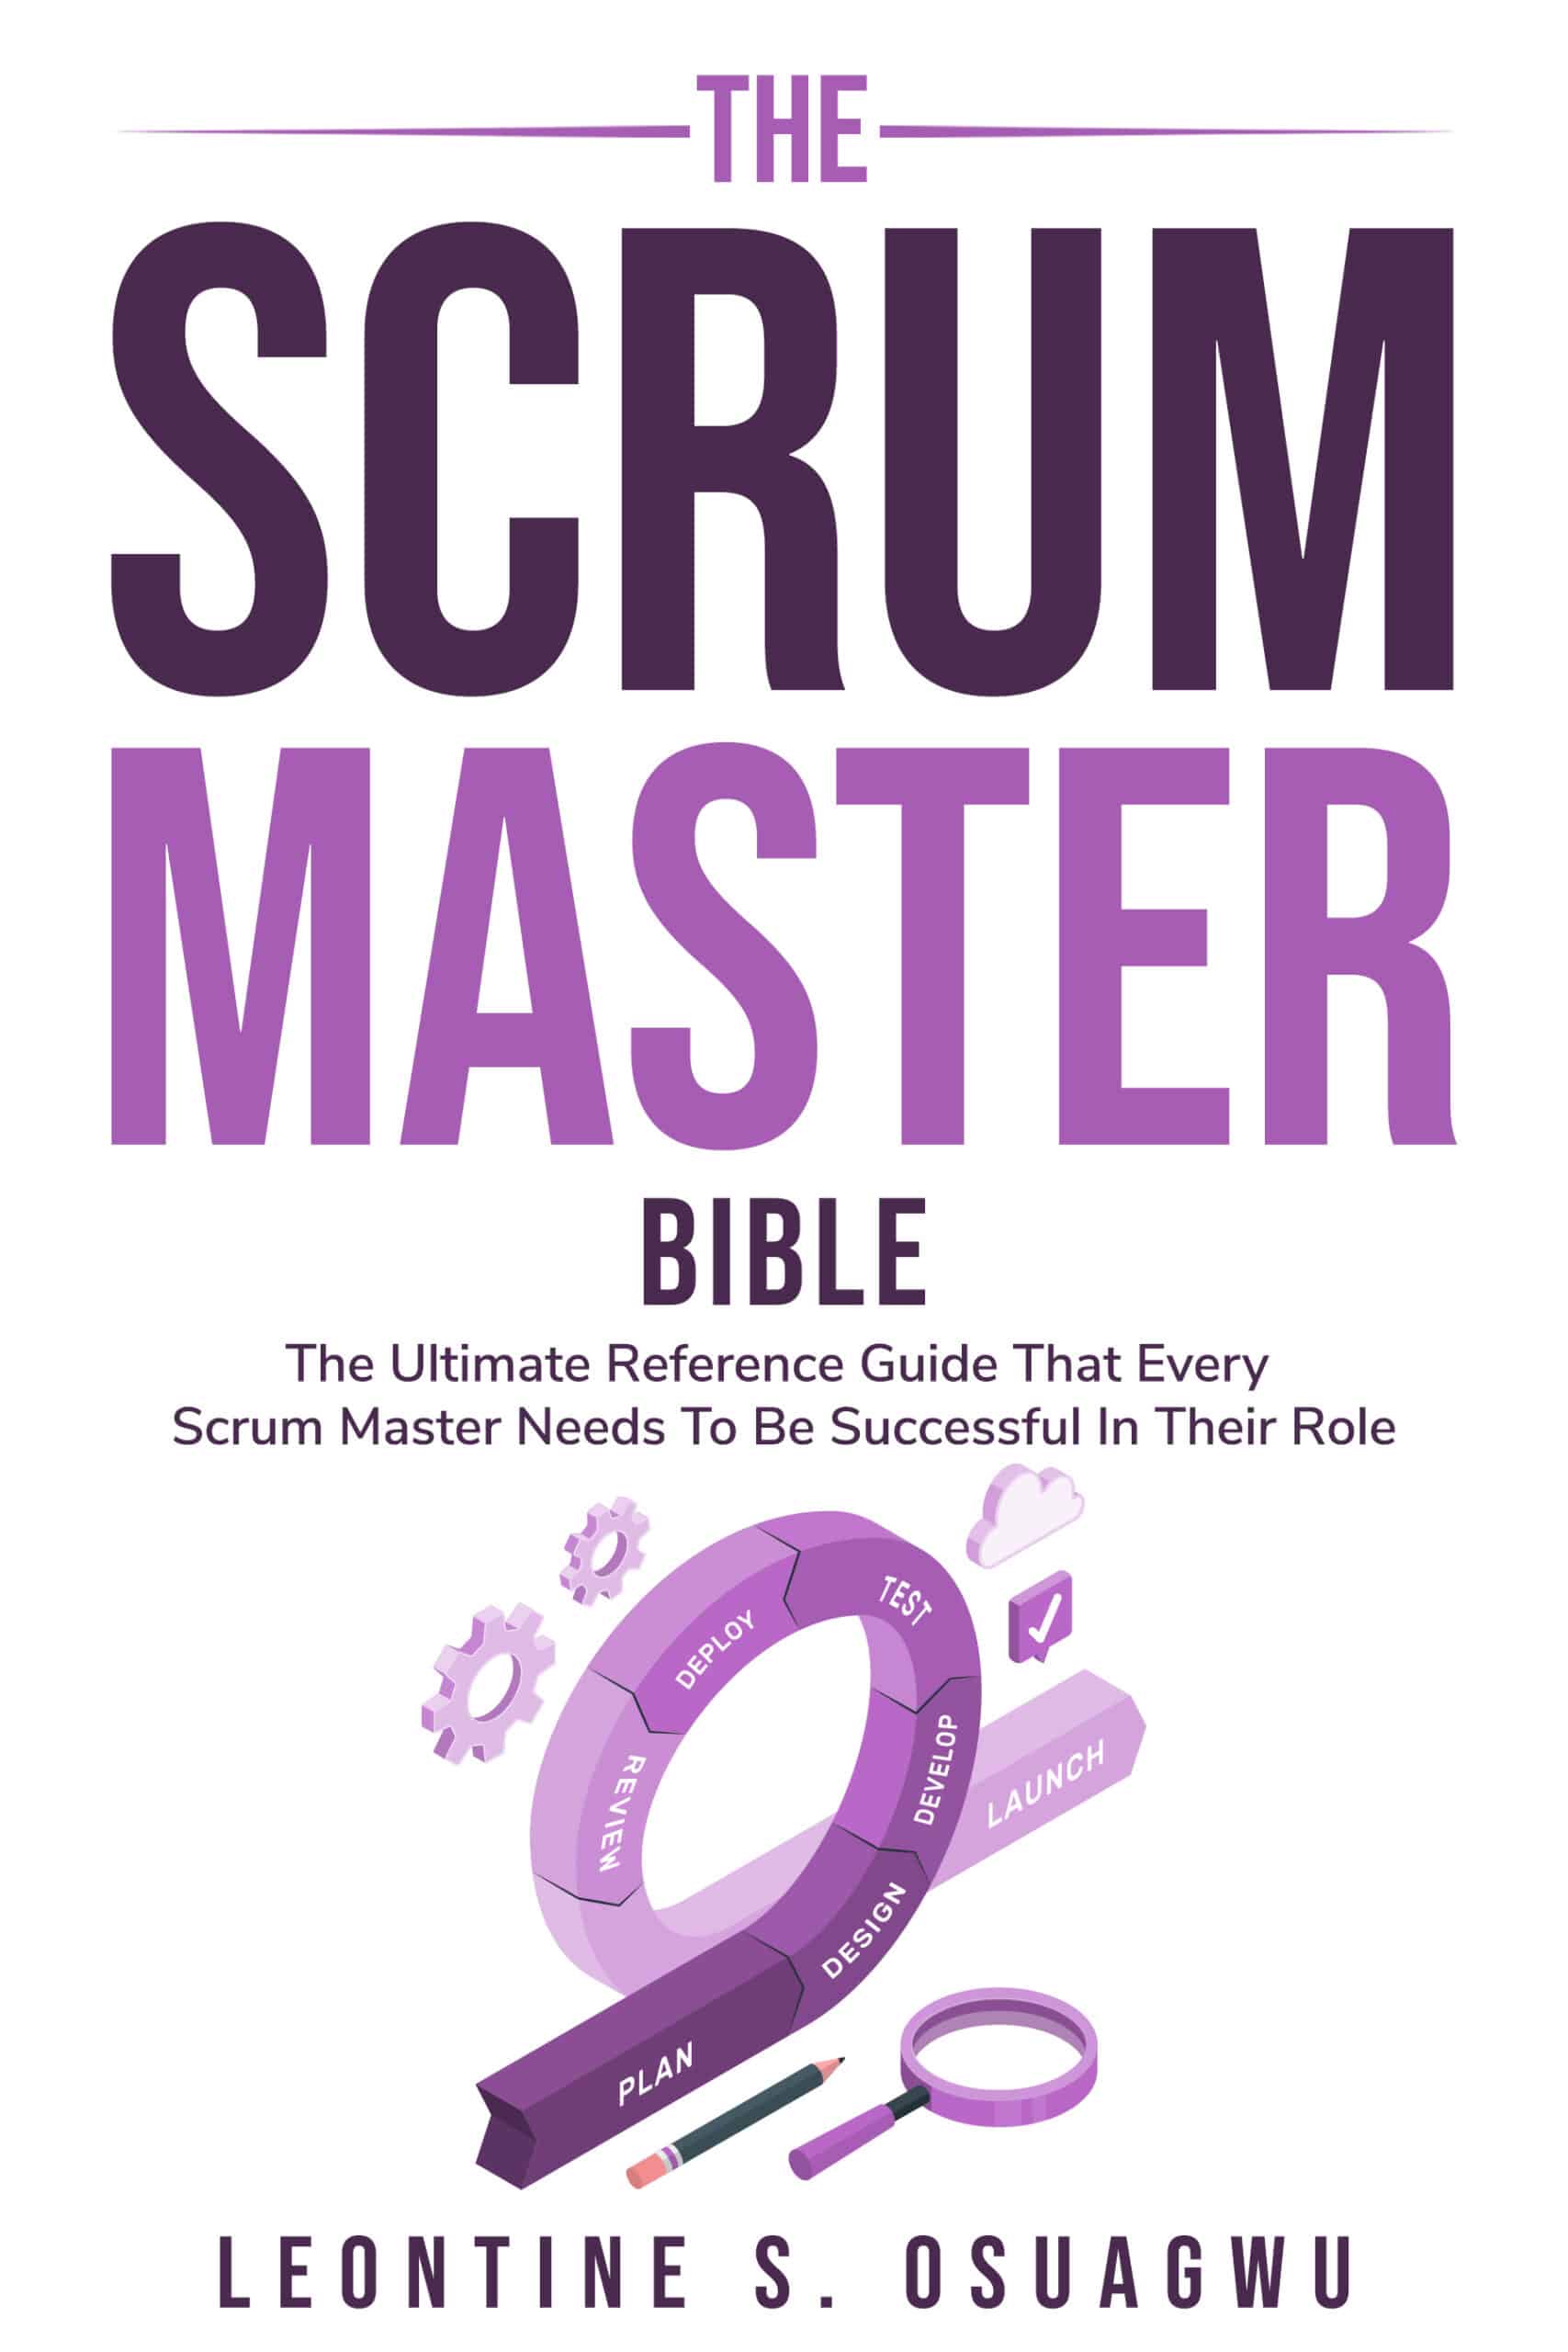 The Scrum Master Bible